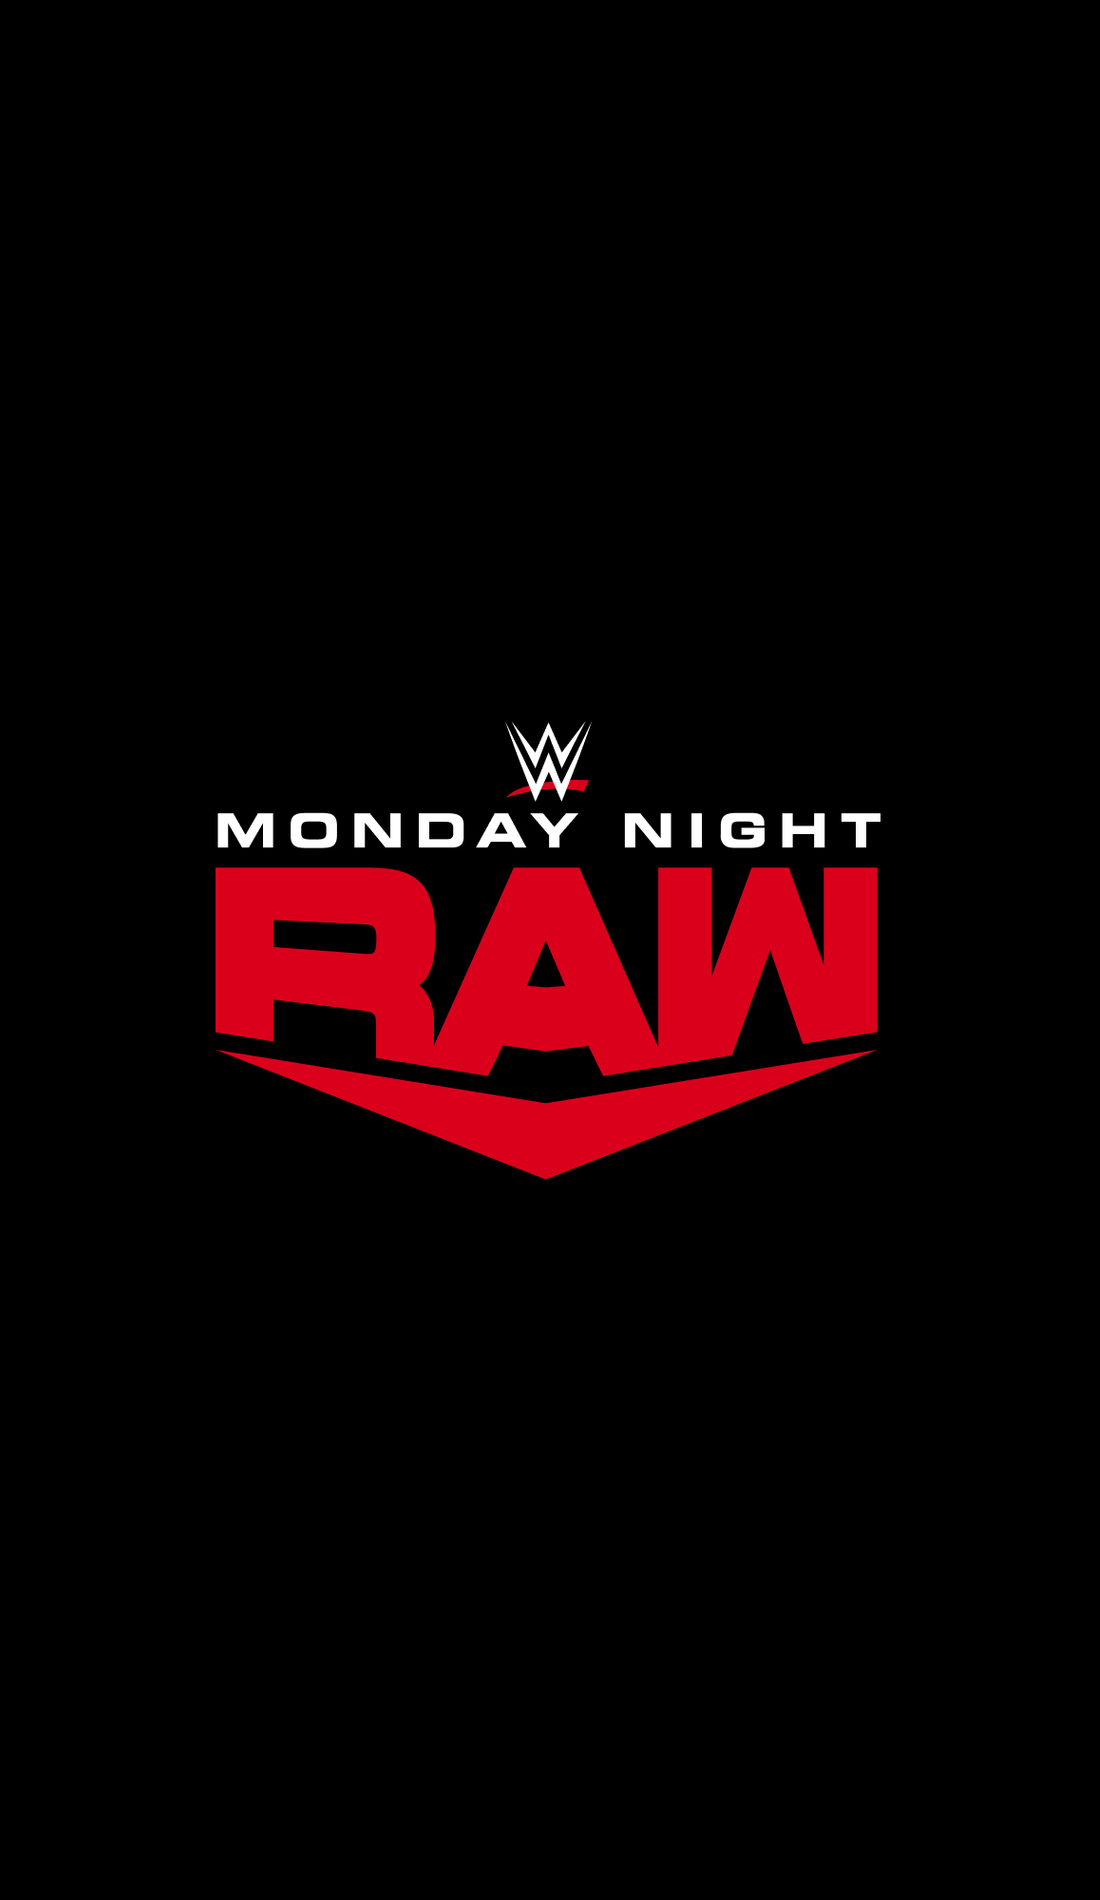 A WWE RAW live event